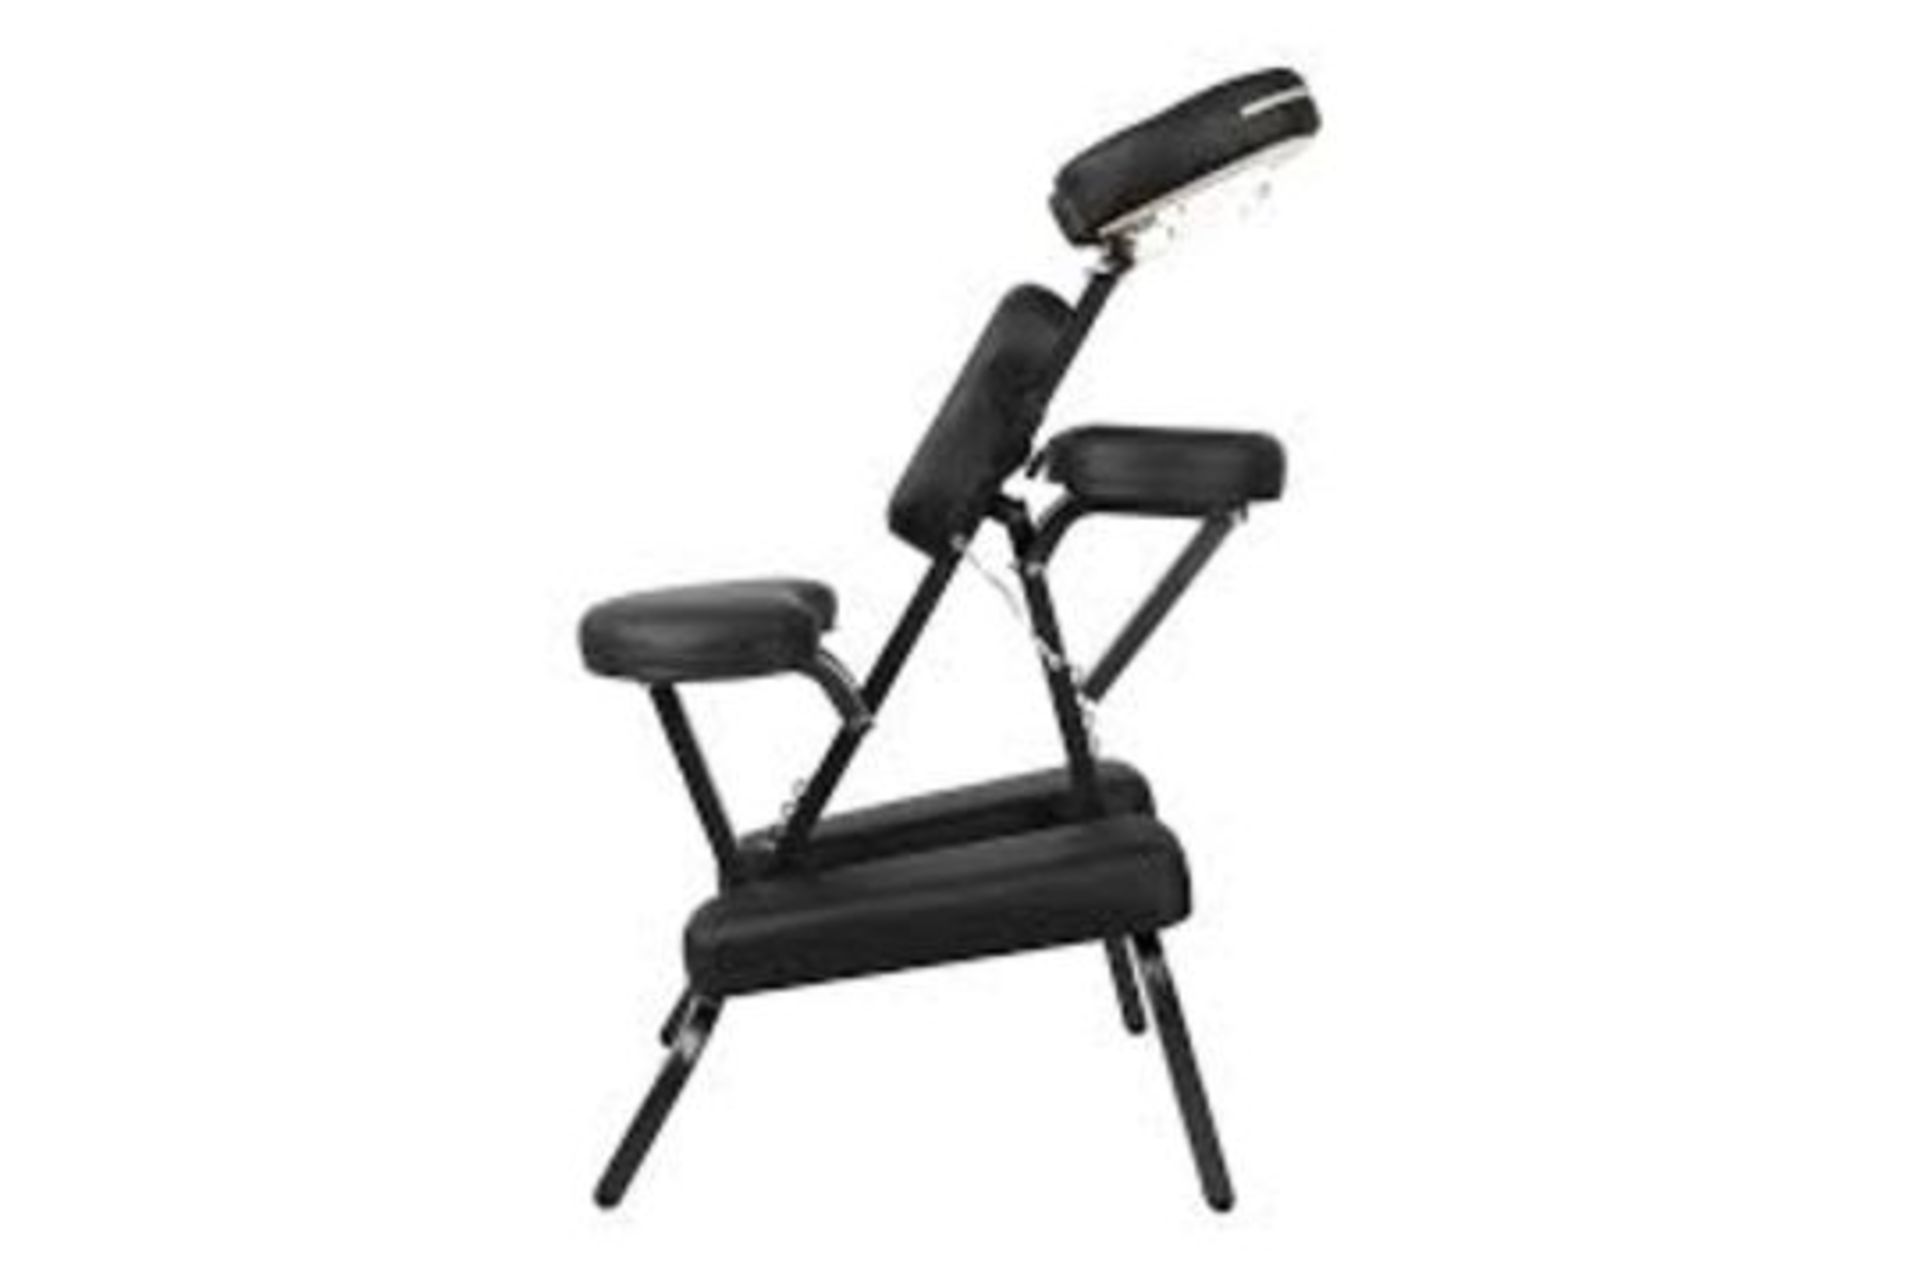 BRAND NEW NAIPO FOLDING PORTABLE MASSAGE CHAIR R15-4